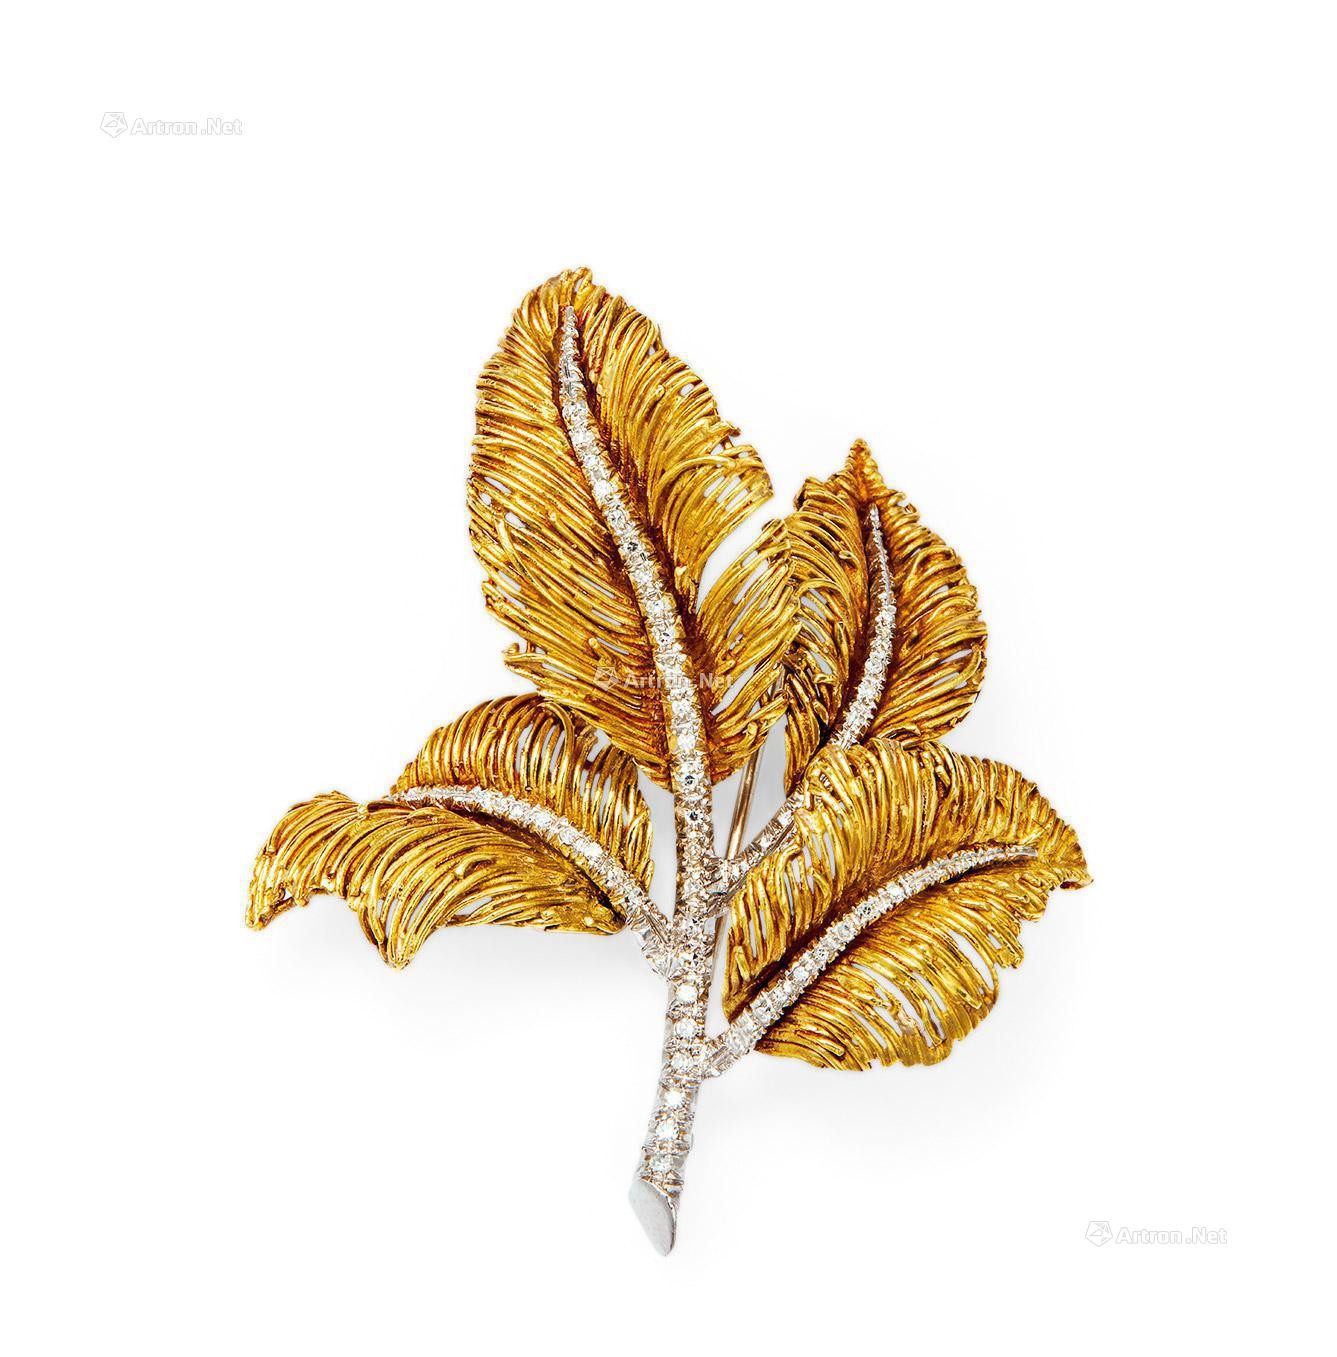 A DIAMOND ‘LEAF’ BROOCH MOUNTED IN 18K YELLOW GOLD